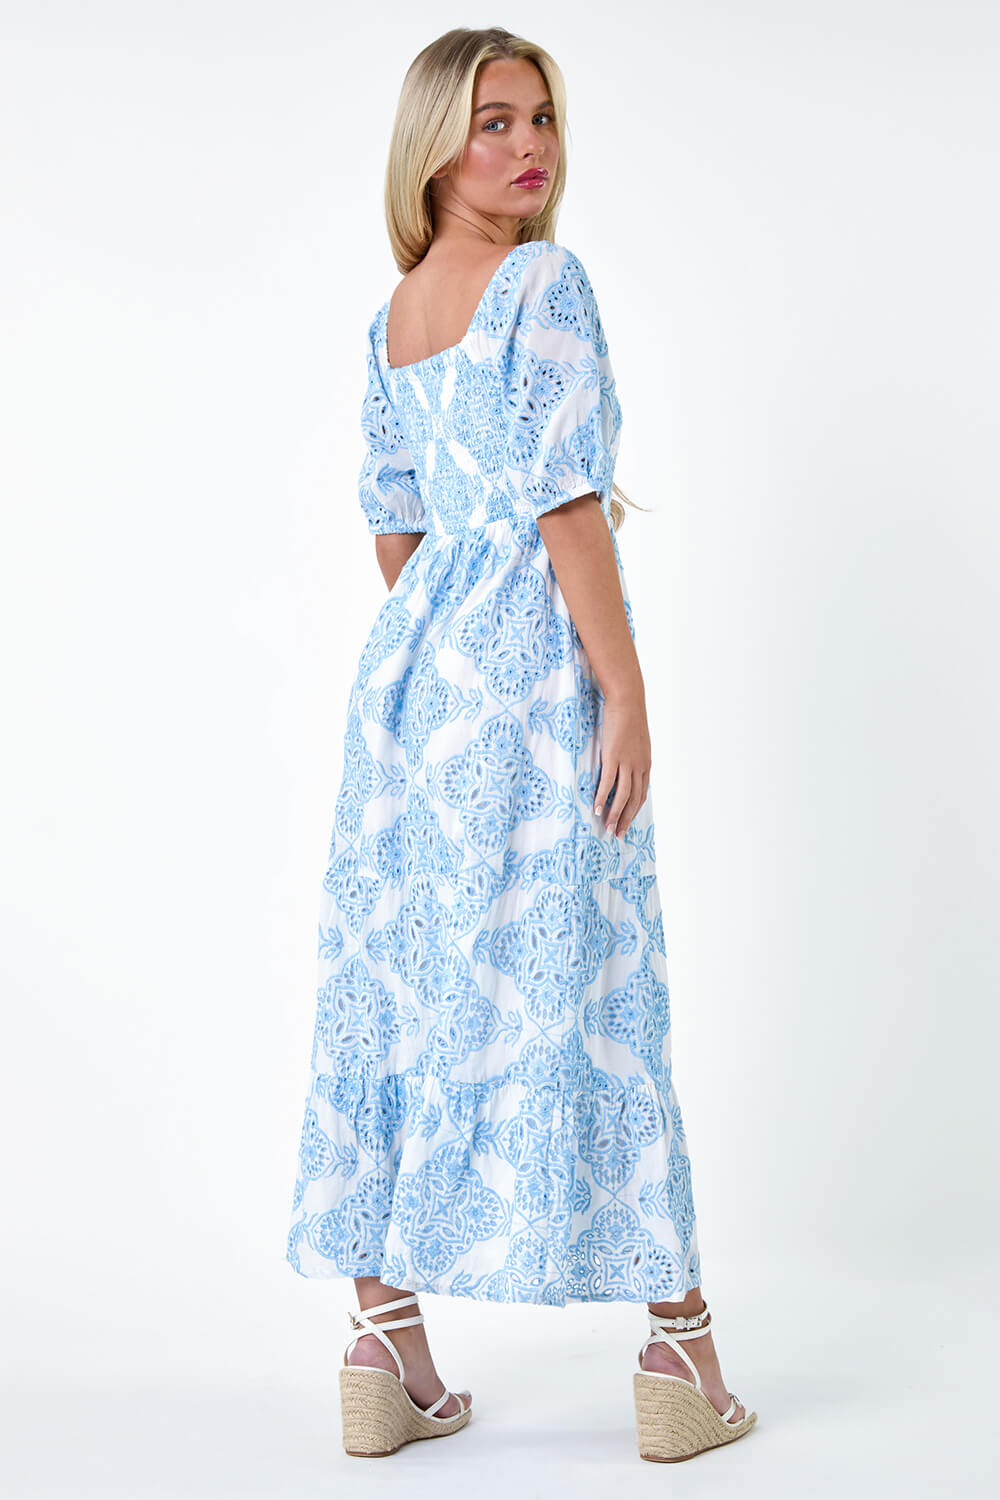 Blue Petite Cotton Embroidered Shirred Maxi Dress, Image 3 of 5